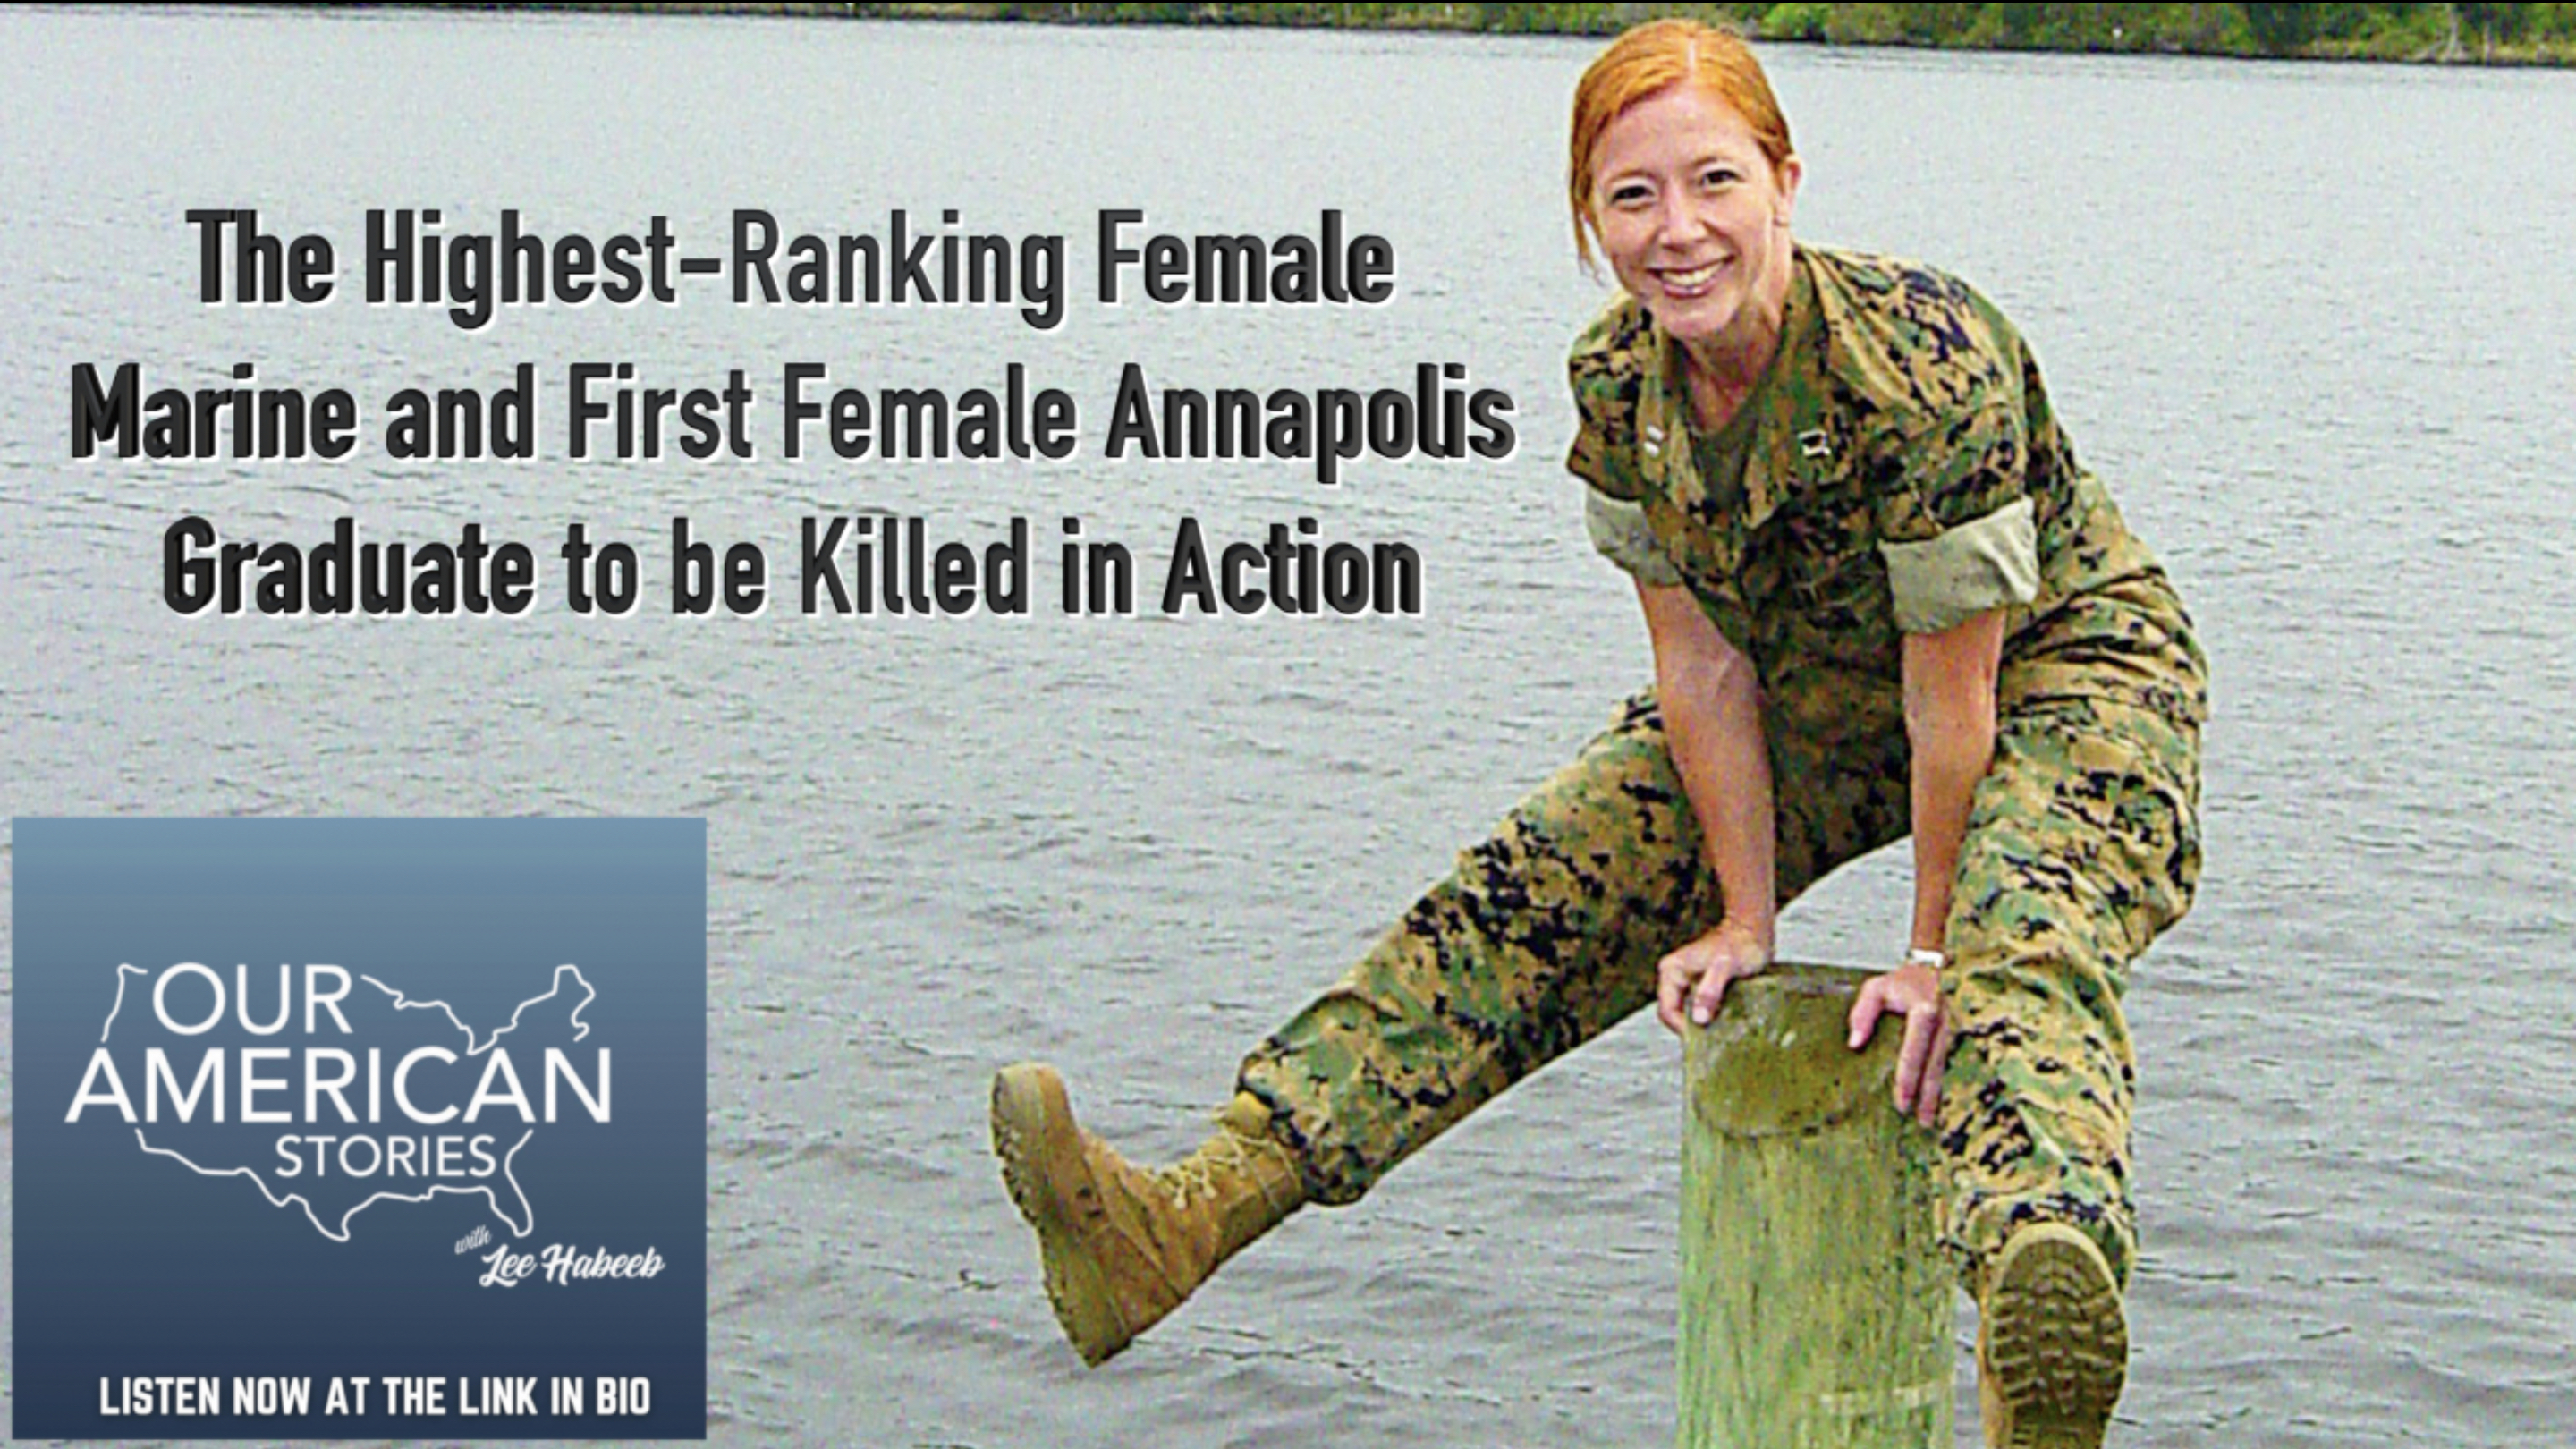 The Highest-Ranking Female Marine and First Female Annapolis Graduate to be Killed in Action